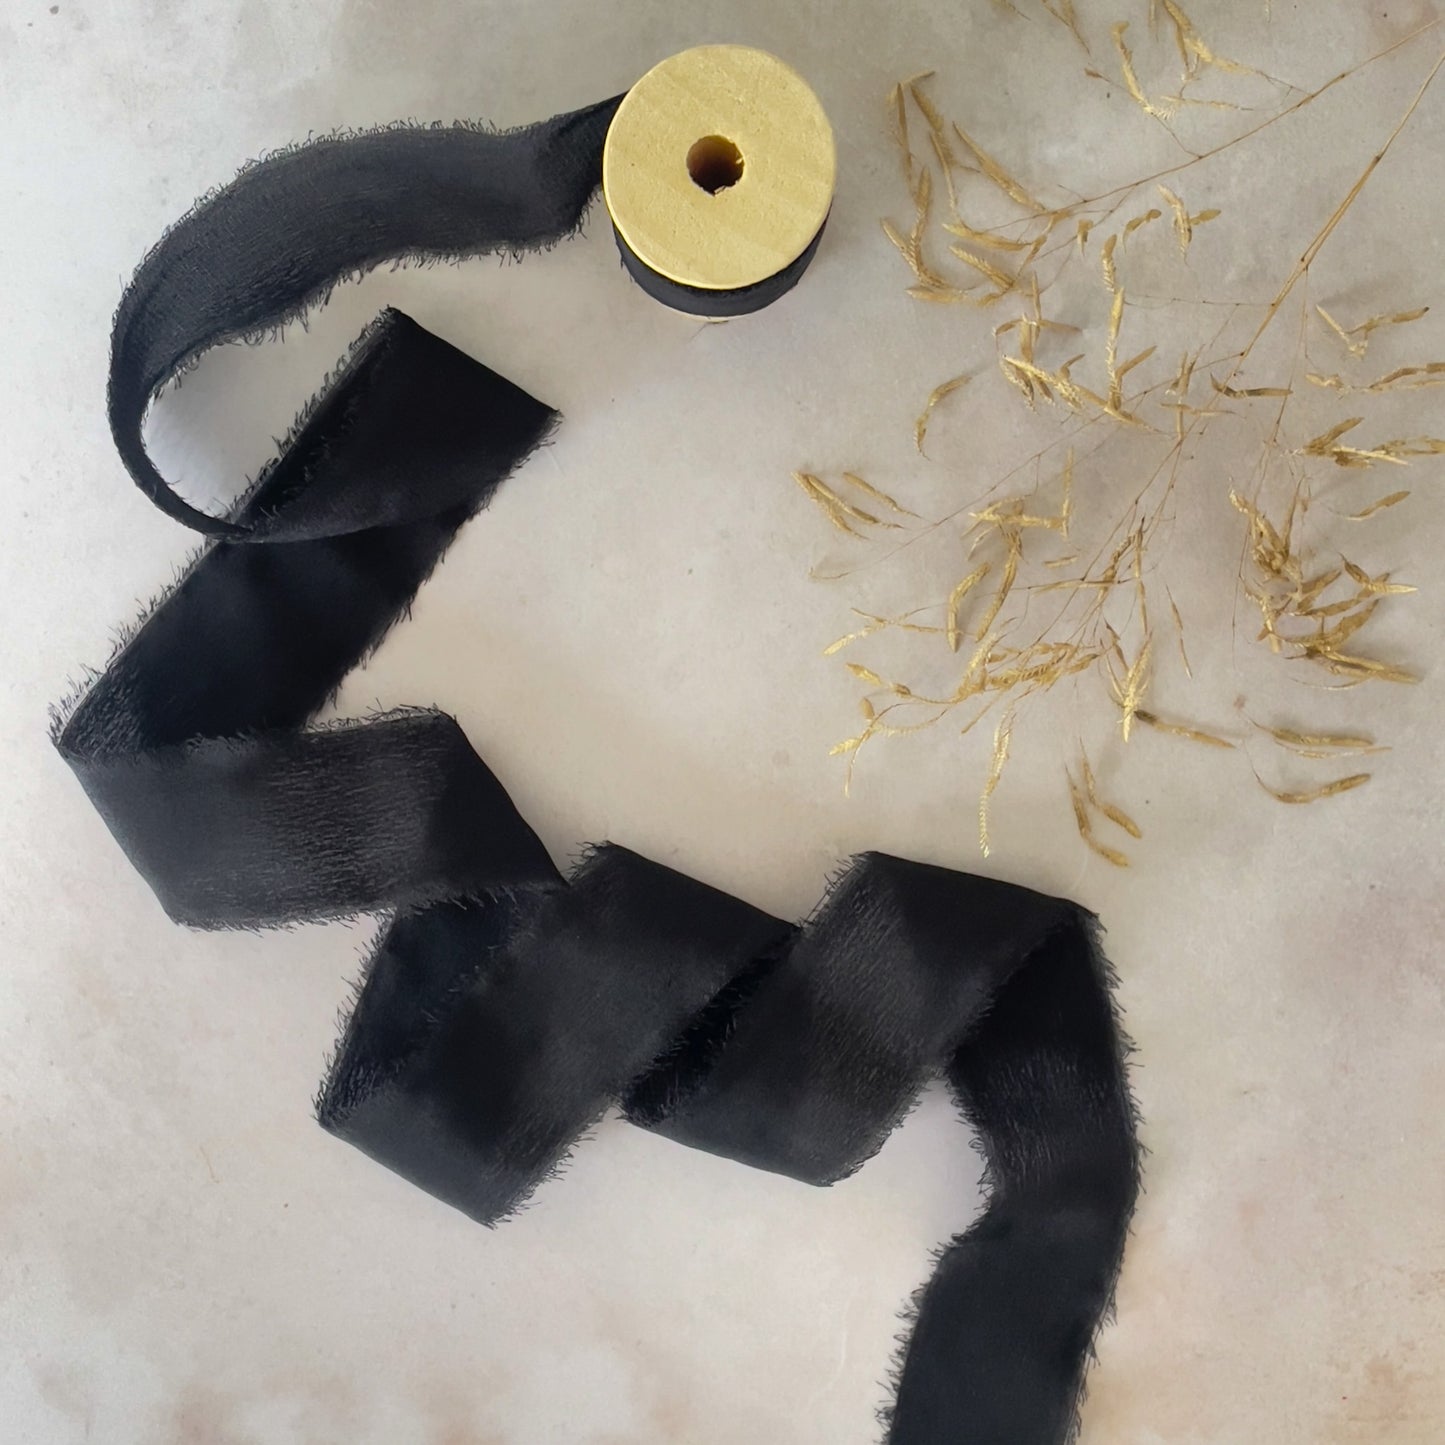 Black silk ribbon for crafts.  Roll of Habotai silk ribbon on a wooden spool.  Raw edge silk for decorating wedding invitations, stationery and crafts.  By The Natural Paper Company